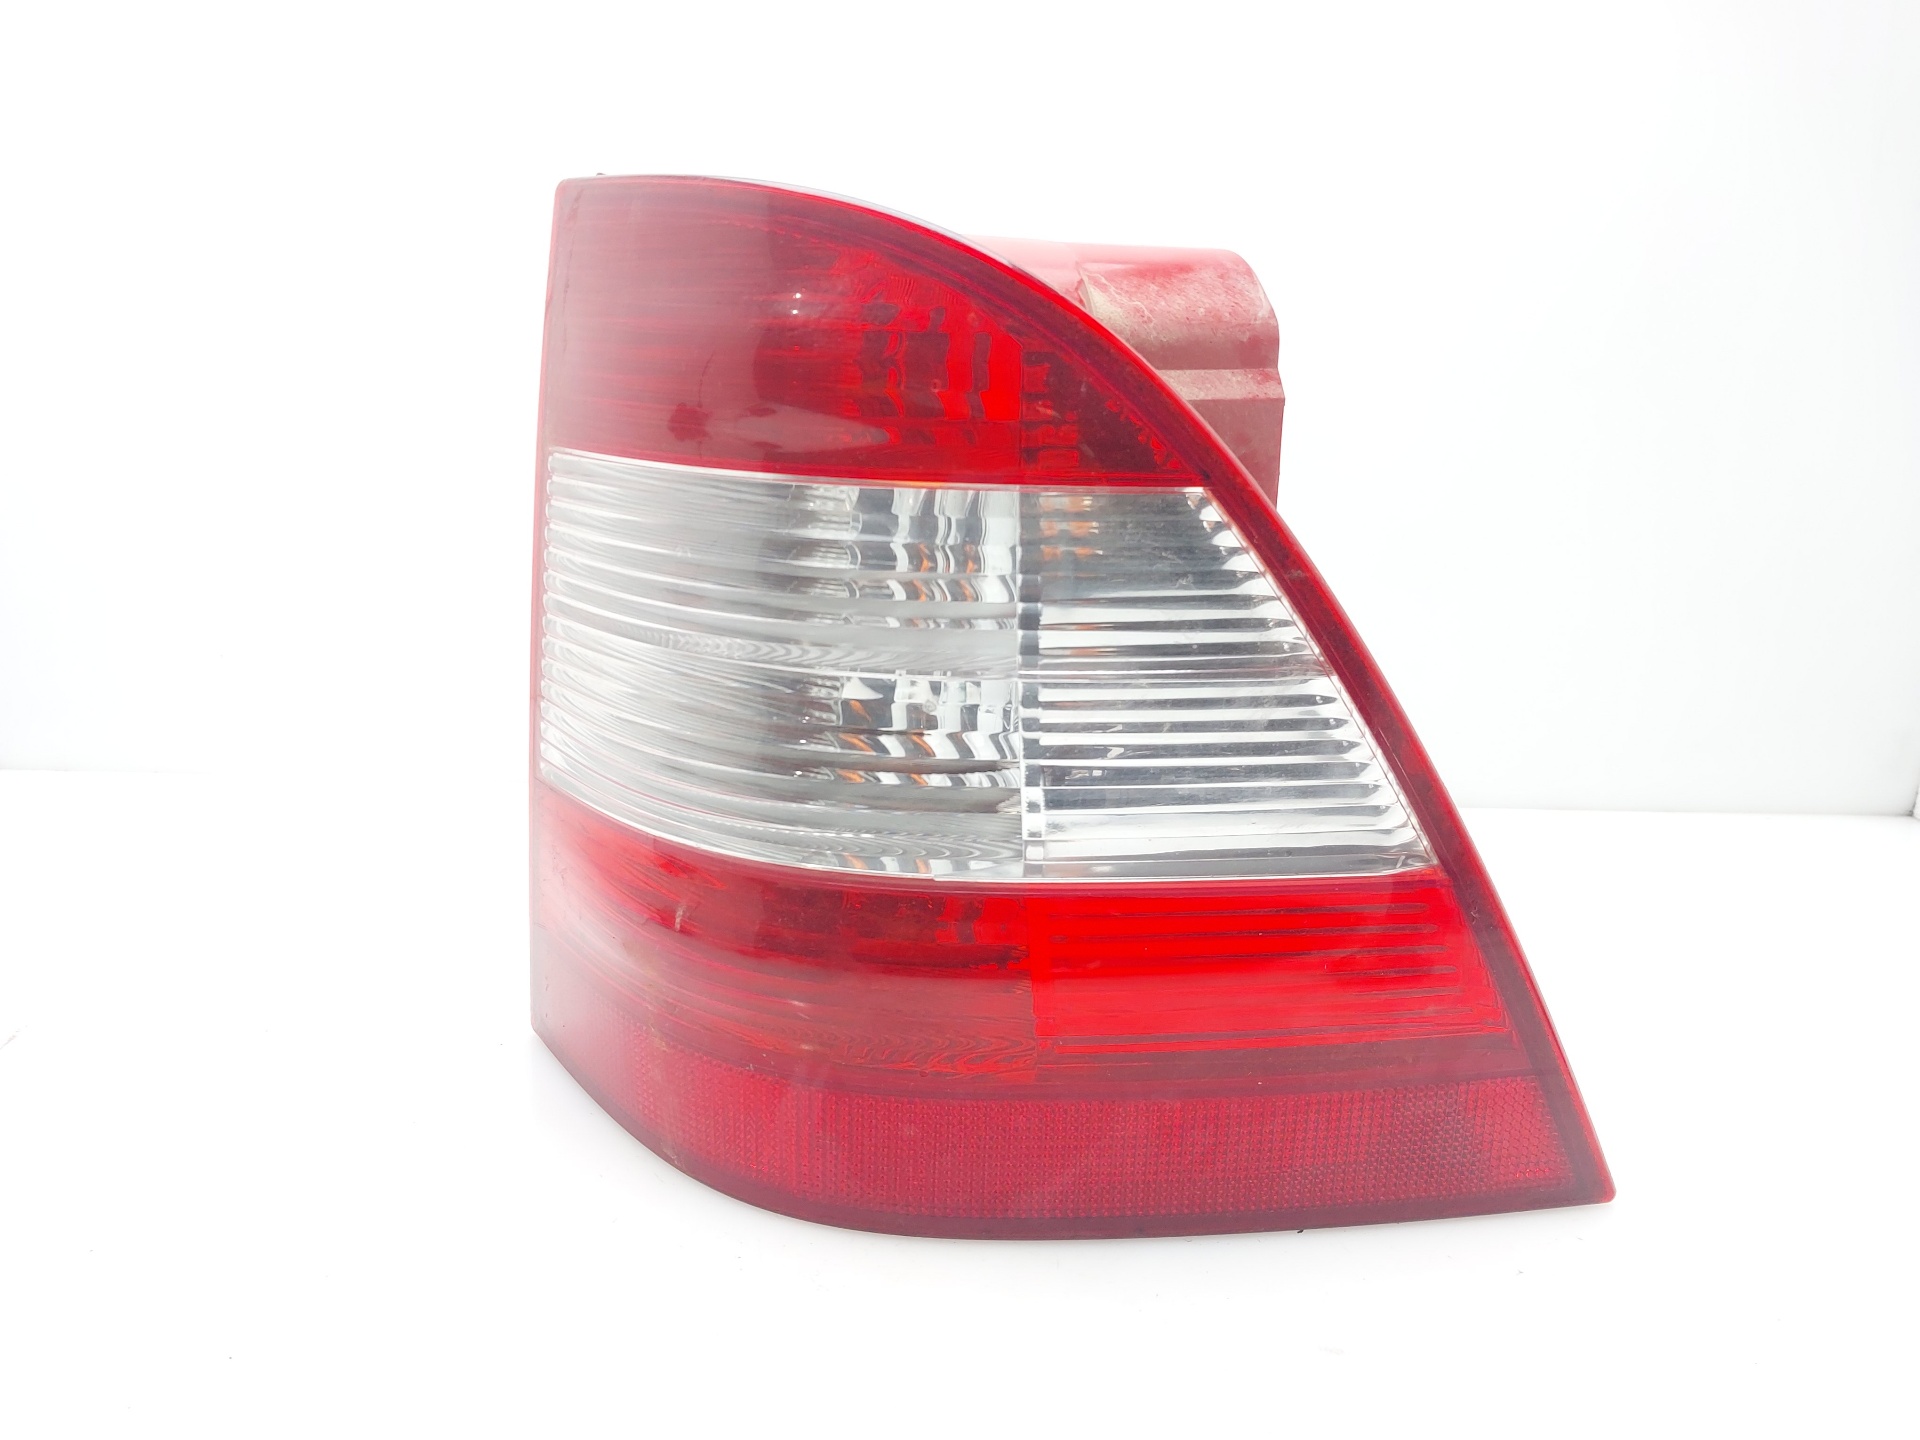 MERCEDES-BENZ M-Class W163 (1997-2005) Rear Right Taillight Lamp A1638202064 23552159